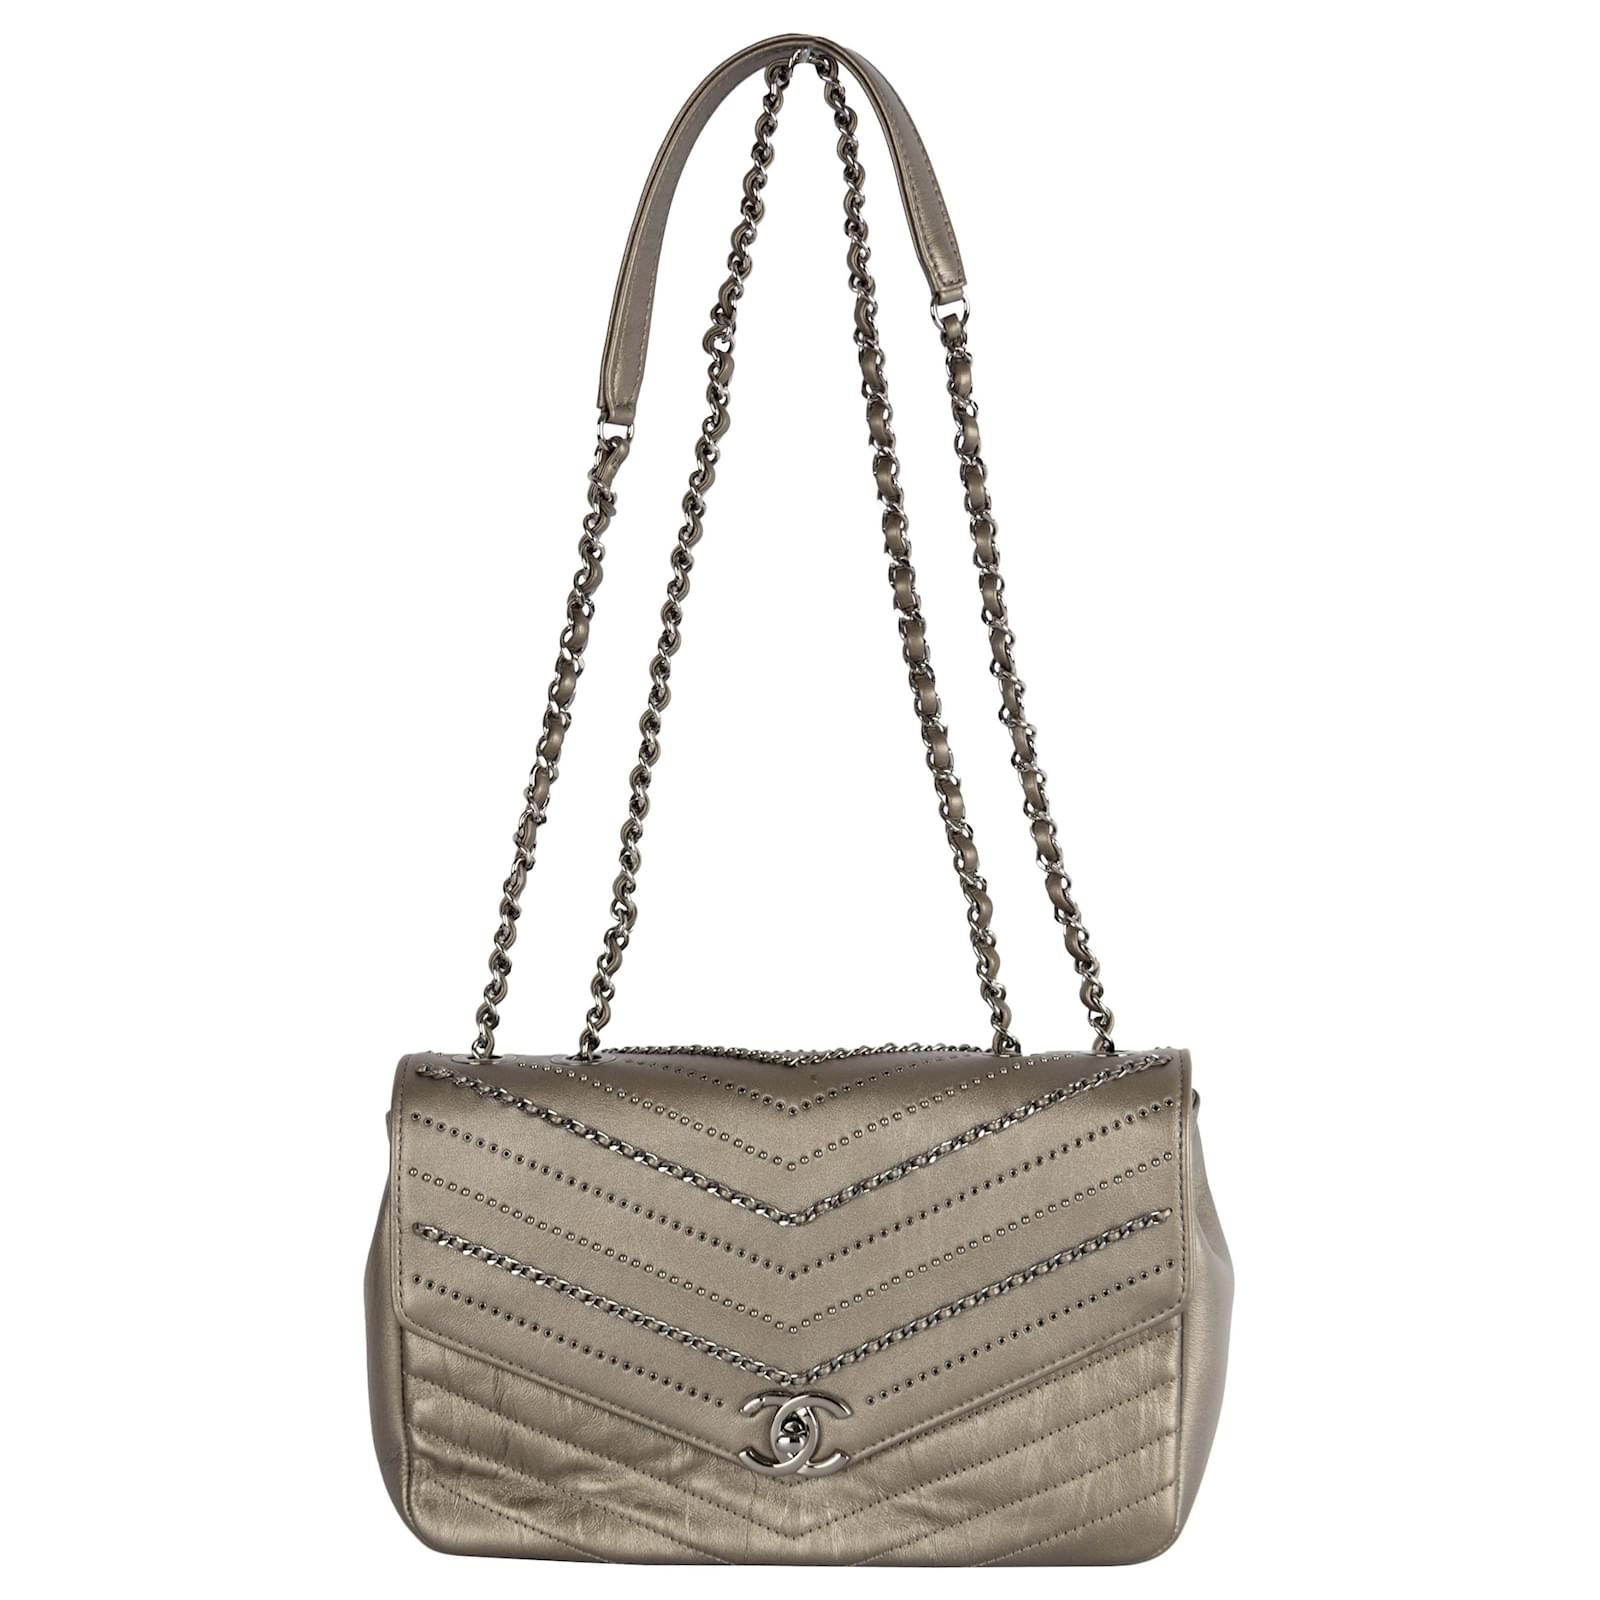 Chanel Embelished 'Chain Sequins' Chevron Flap Bag Silvery